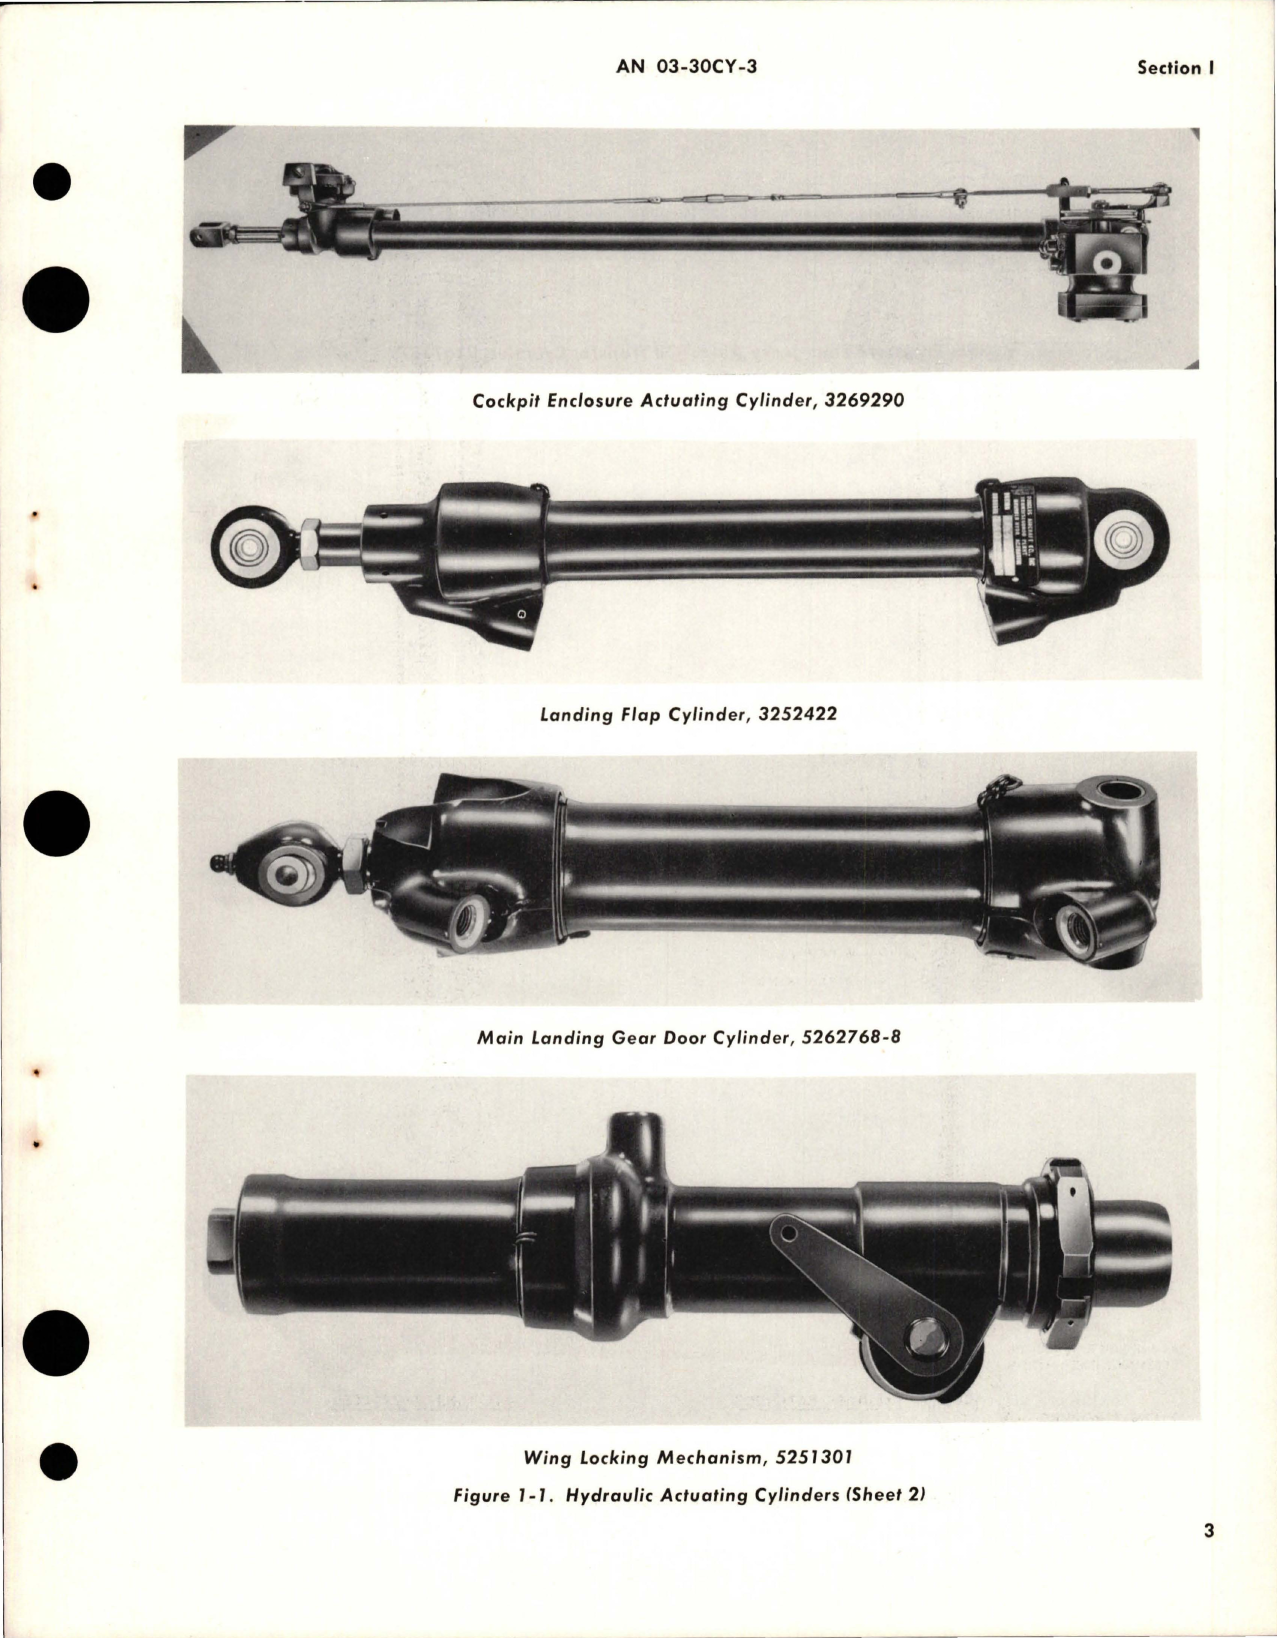 Sample page 7 from AirCorps Library document: Overhaul Instructions for Hydraulic Actuating Cylinders